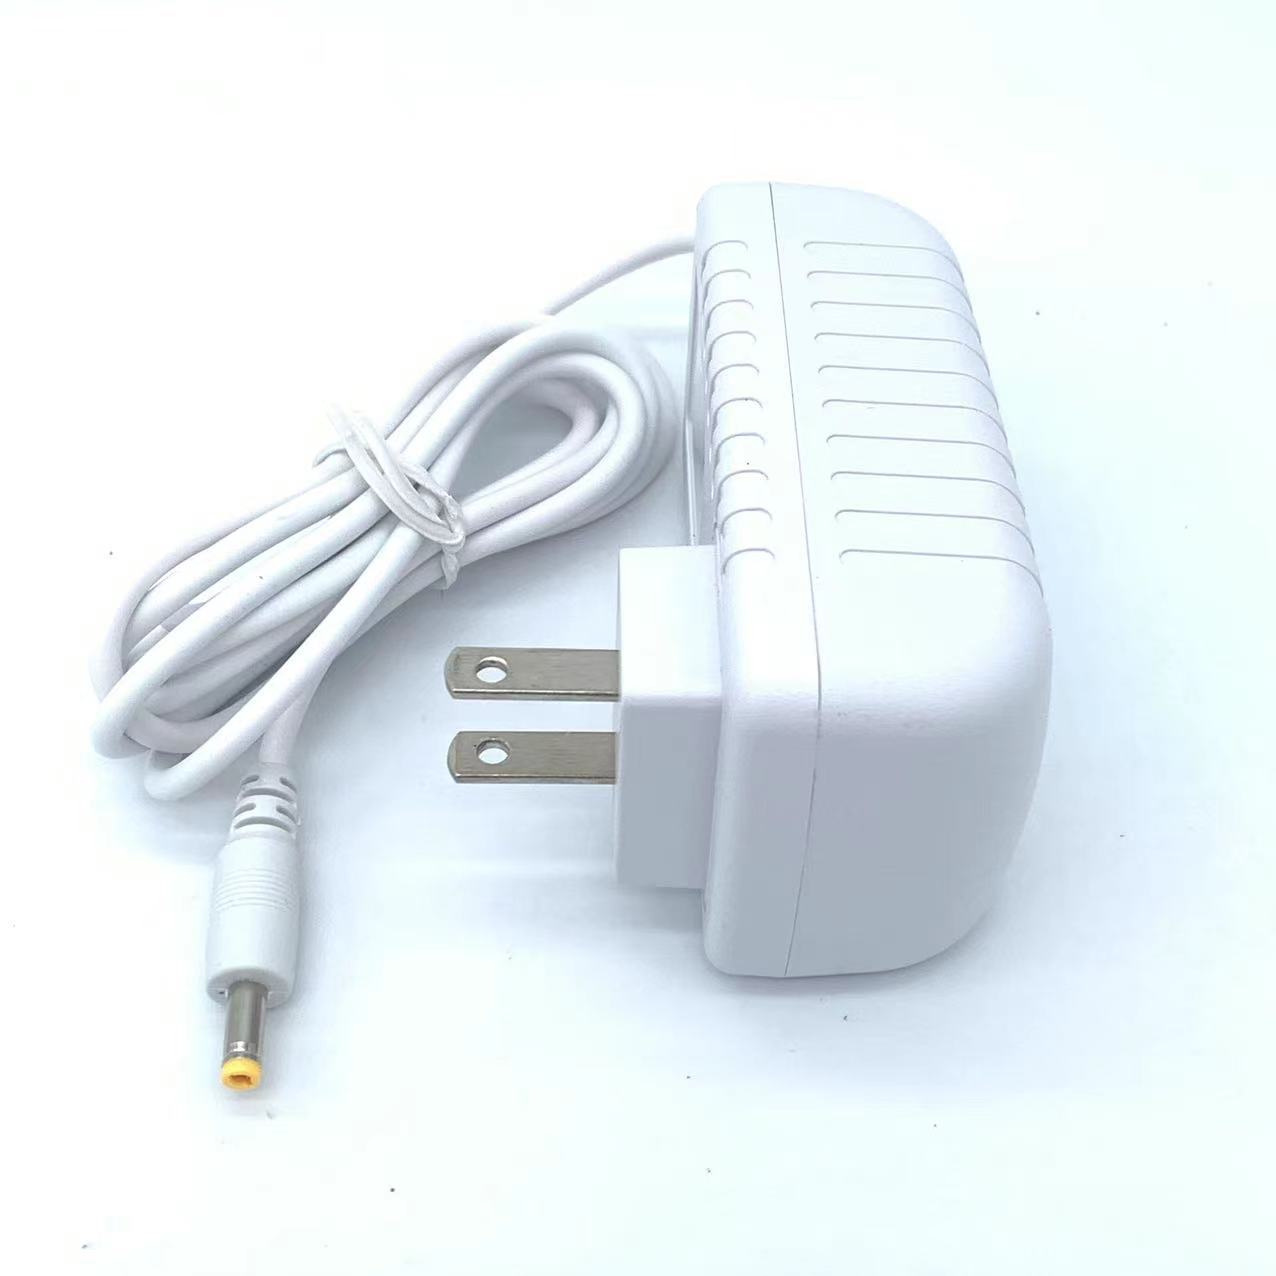 *Brand NEW*Suitable for Yameng YAMAN Beauty Instrument Charger HRF-10T/11T/PLUS/pro Model Charger Power Supply